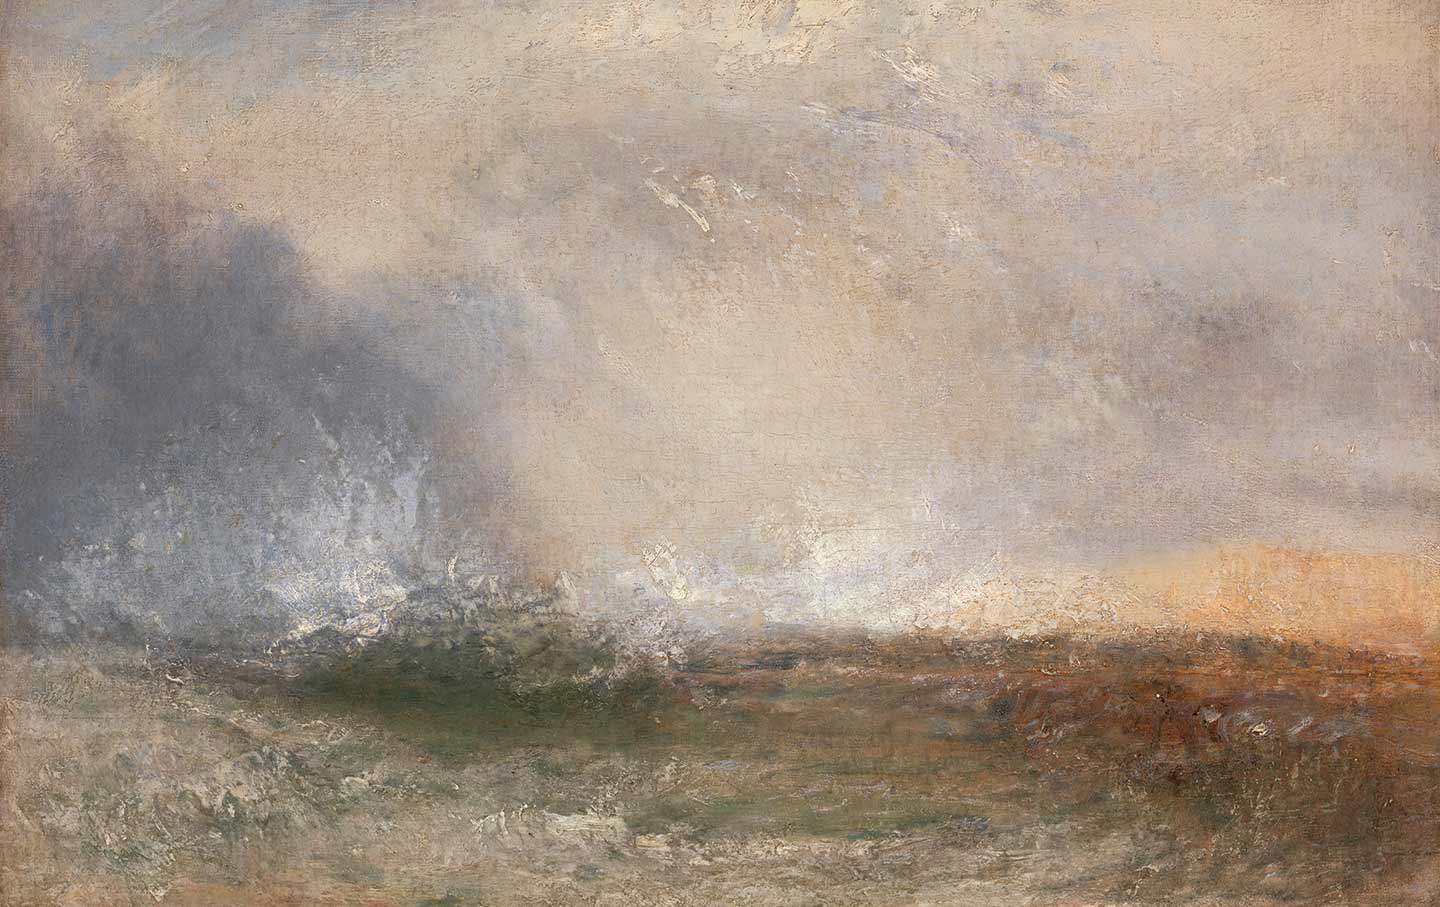 Stormy Sea Breaking on a Shore, by J.M.W. Turner